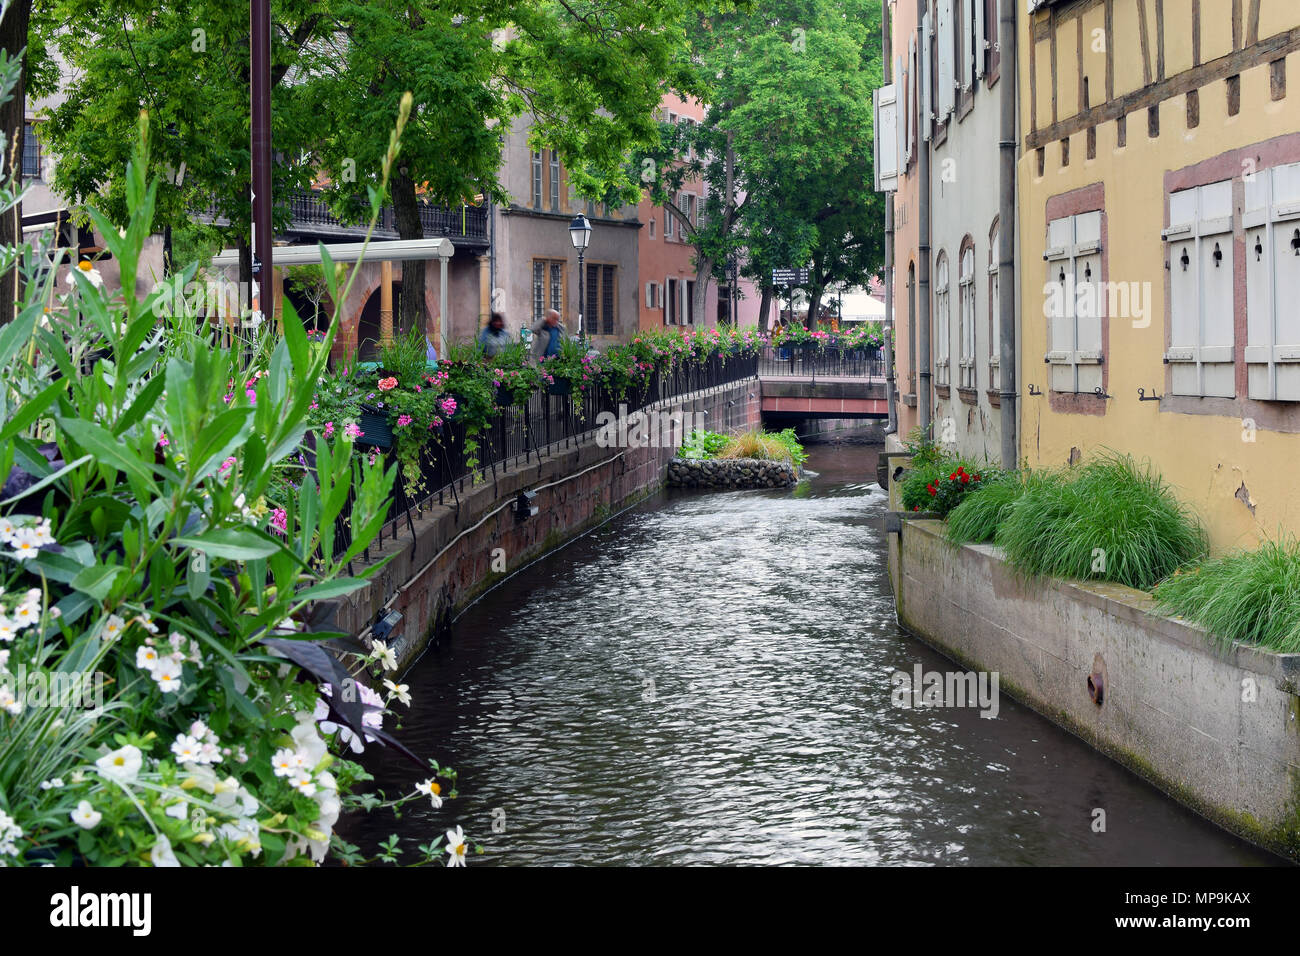 COLMAR, FRANCE - May 17, 2018: Small canal in Colmar town. Stock Photo